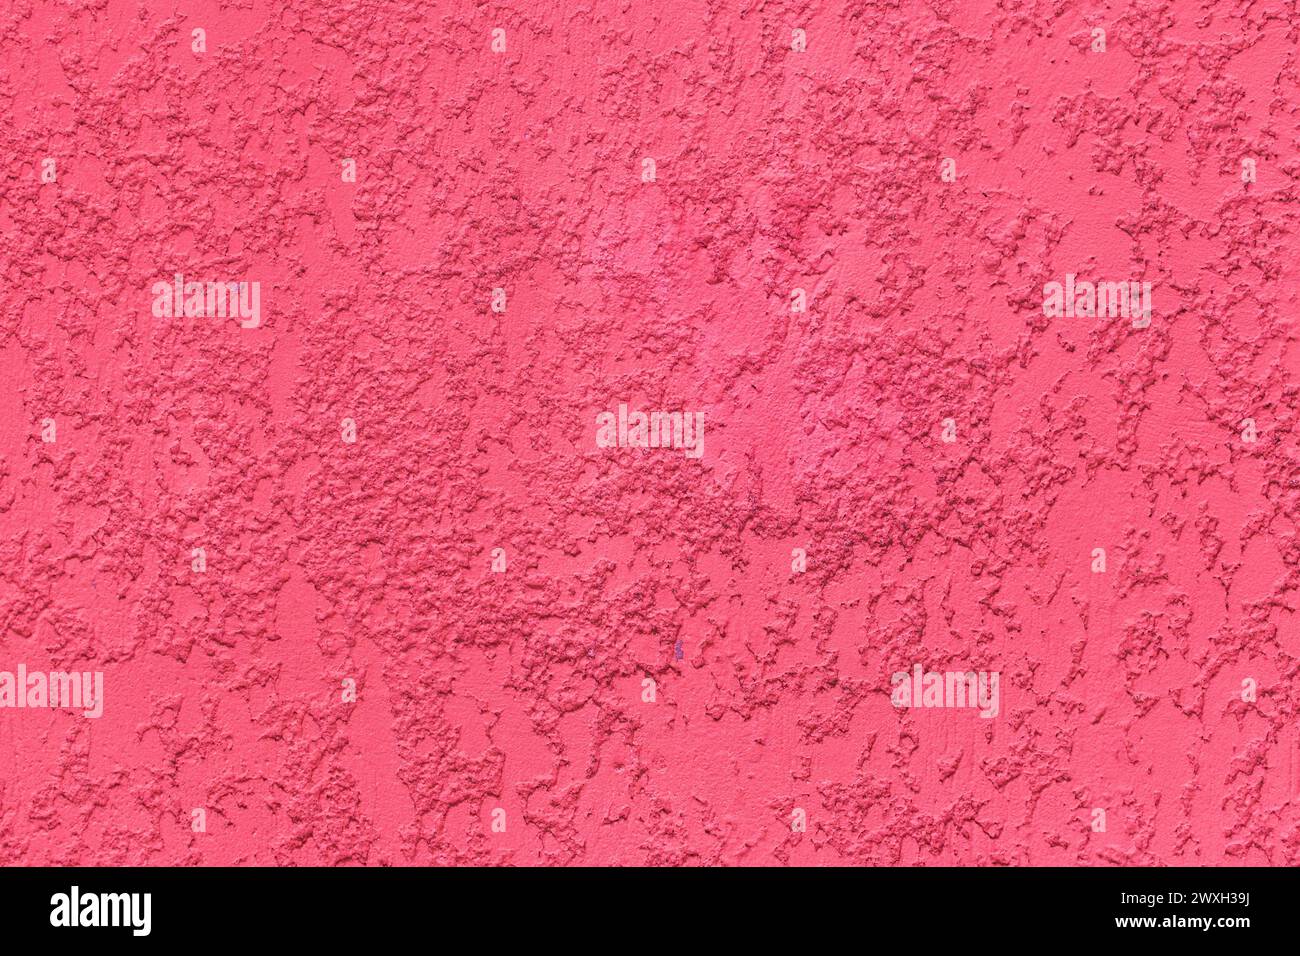 Pink paint texture plaster wall rough stucco background solid abstract pattern surface. Stock Photo